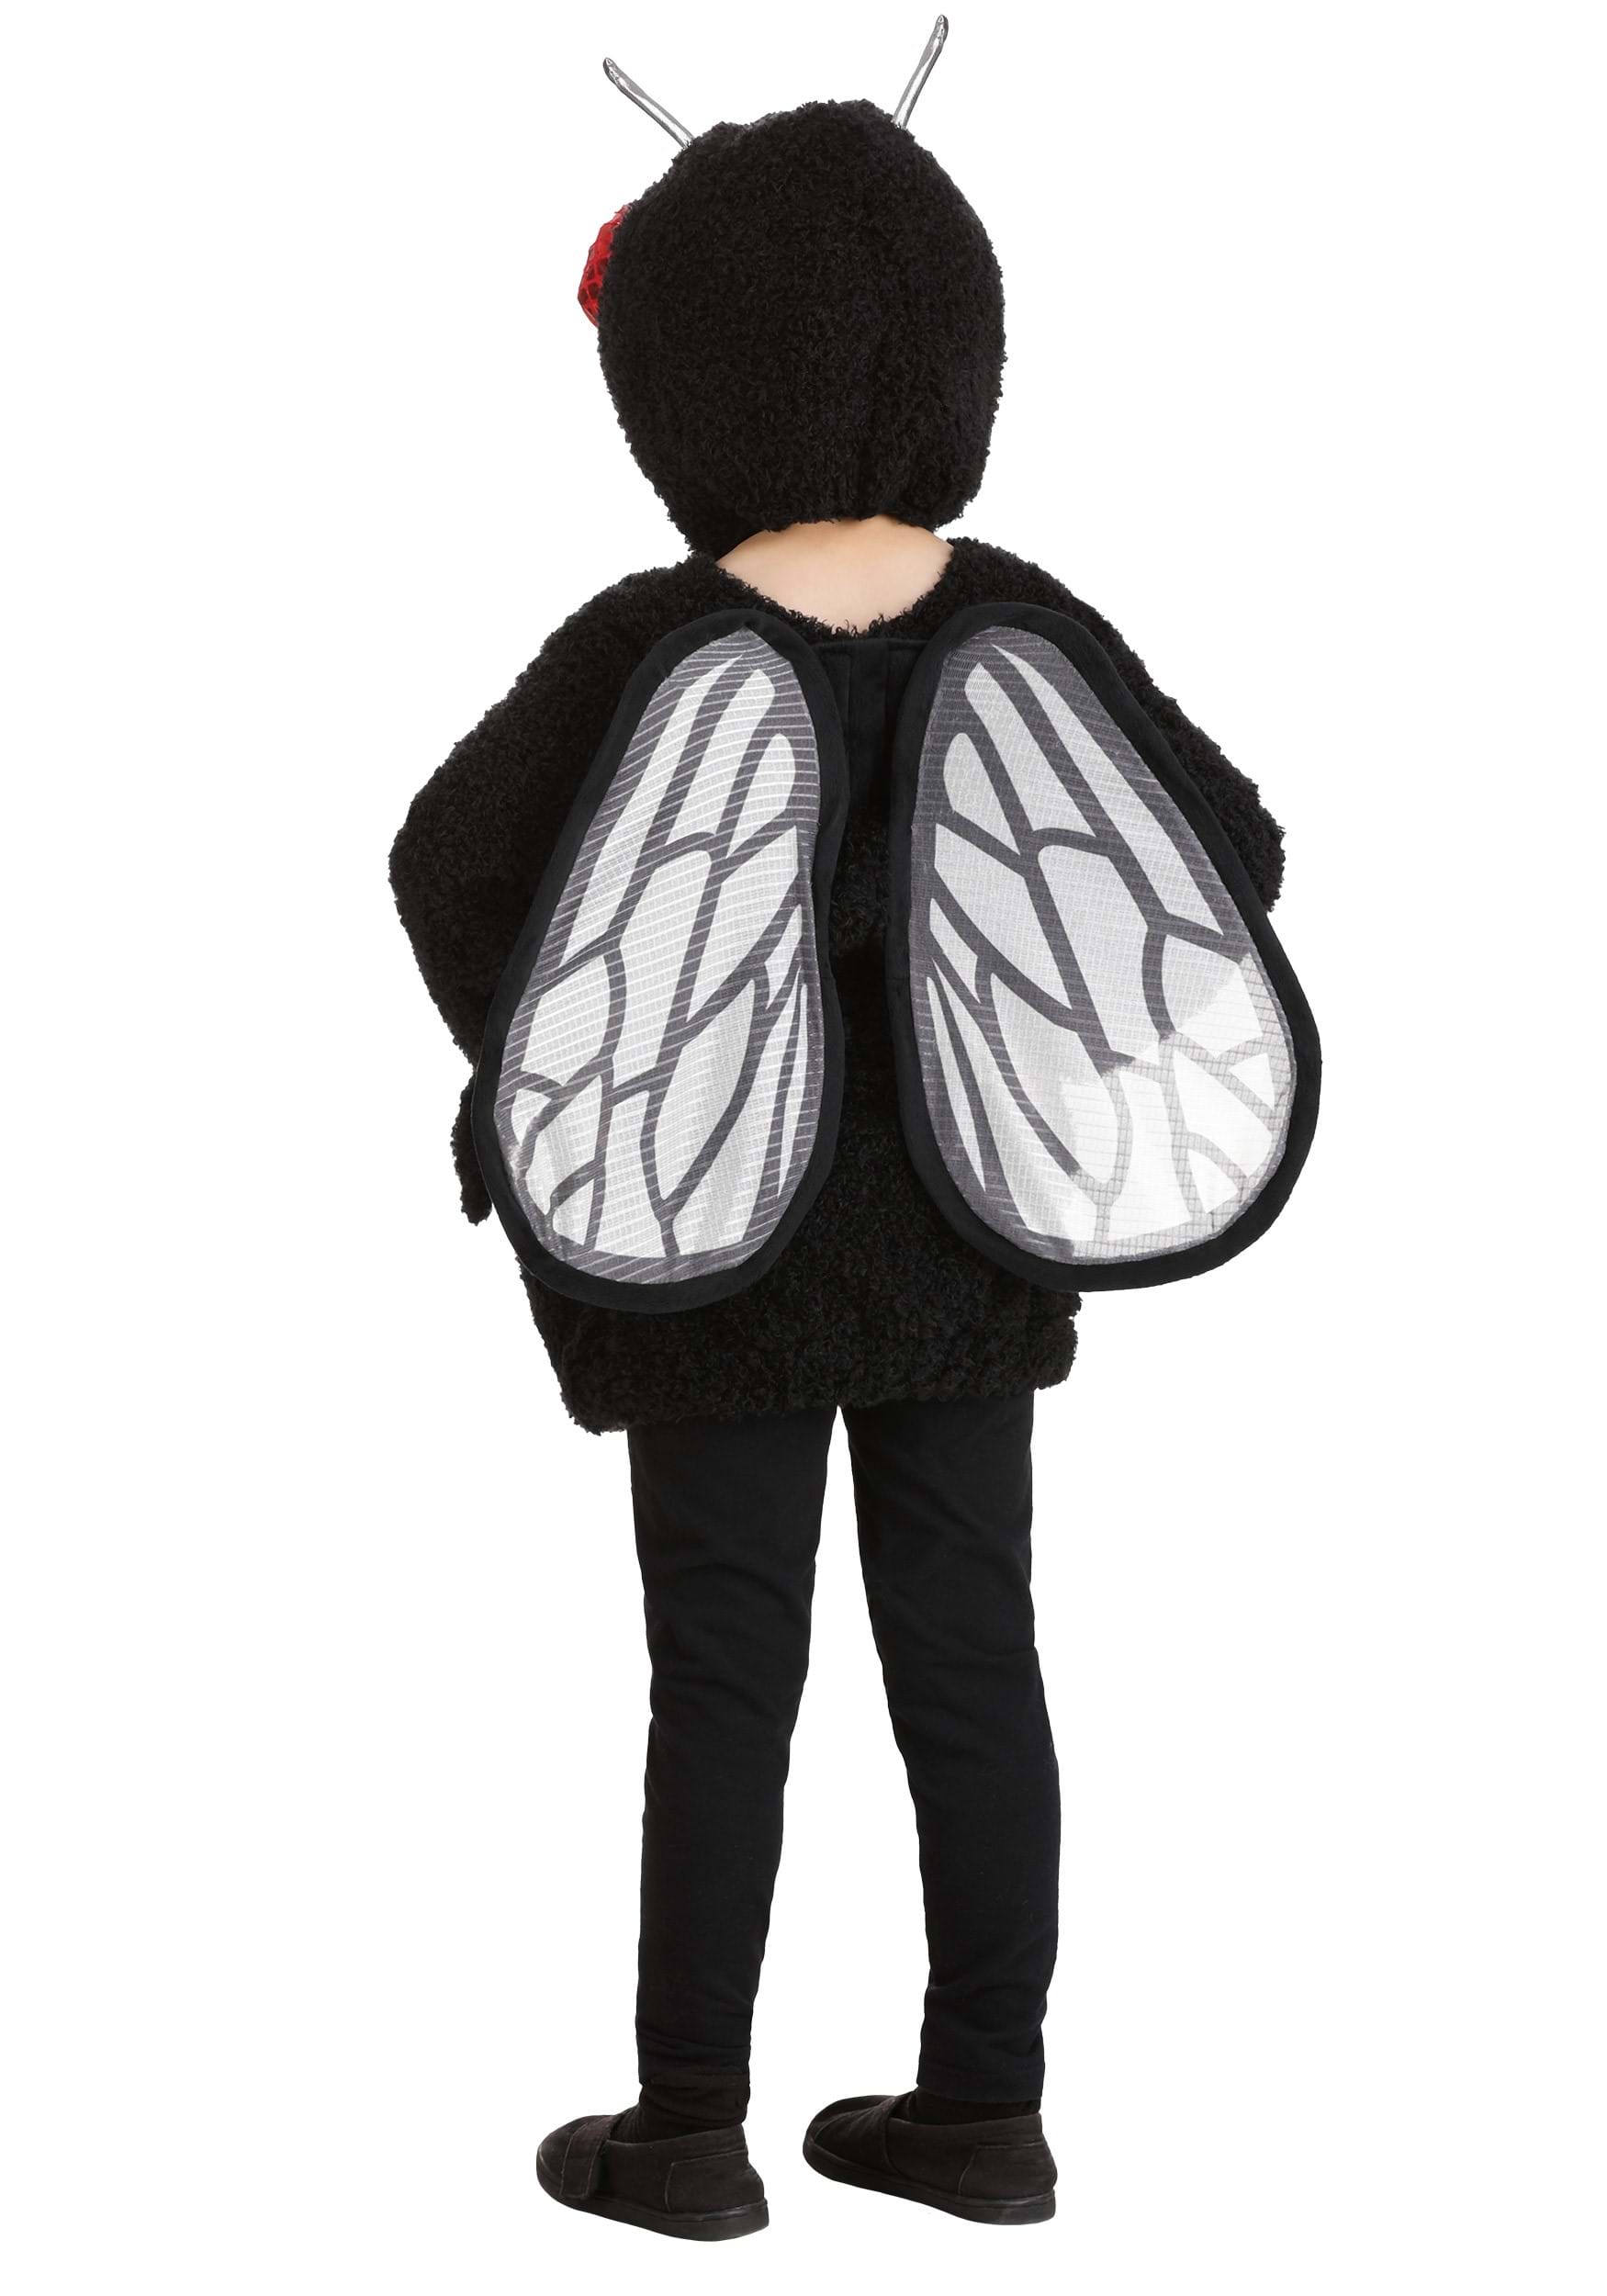 https://images.halloweencostumes.com.au/products/78459/2-1-263510/toddler-fuzzy-fly-costume-alt-1.jpg